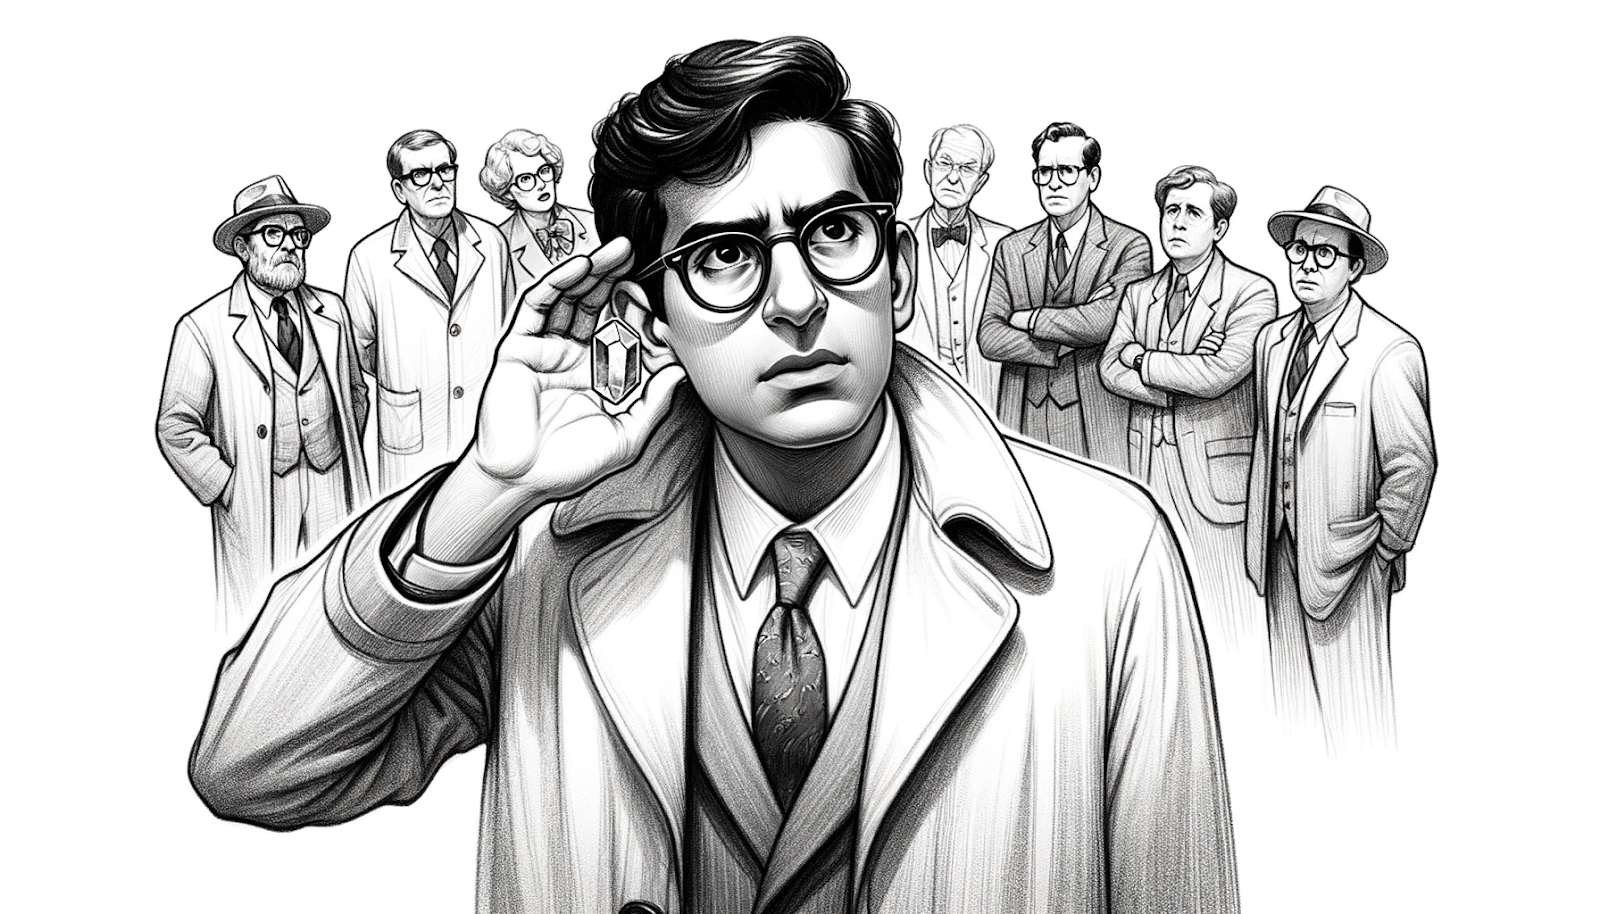 Prompt
Drawing of Dr. Arjun Patel, a young man with glasses, holding the crystal up to his ear, a puzzled look on his face, as the rest of the crew gathers around curiously.